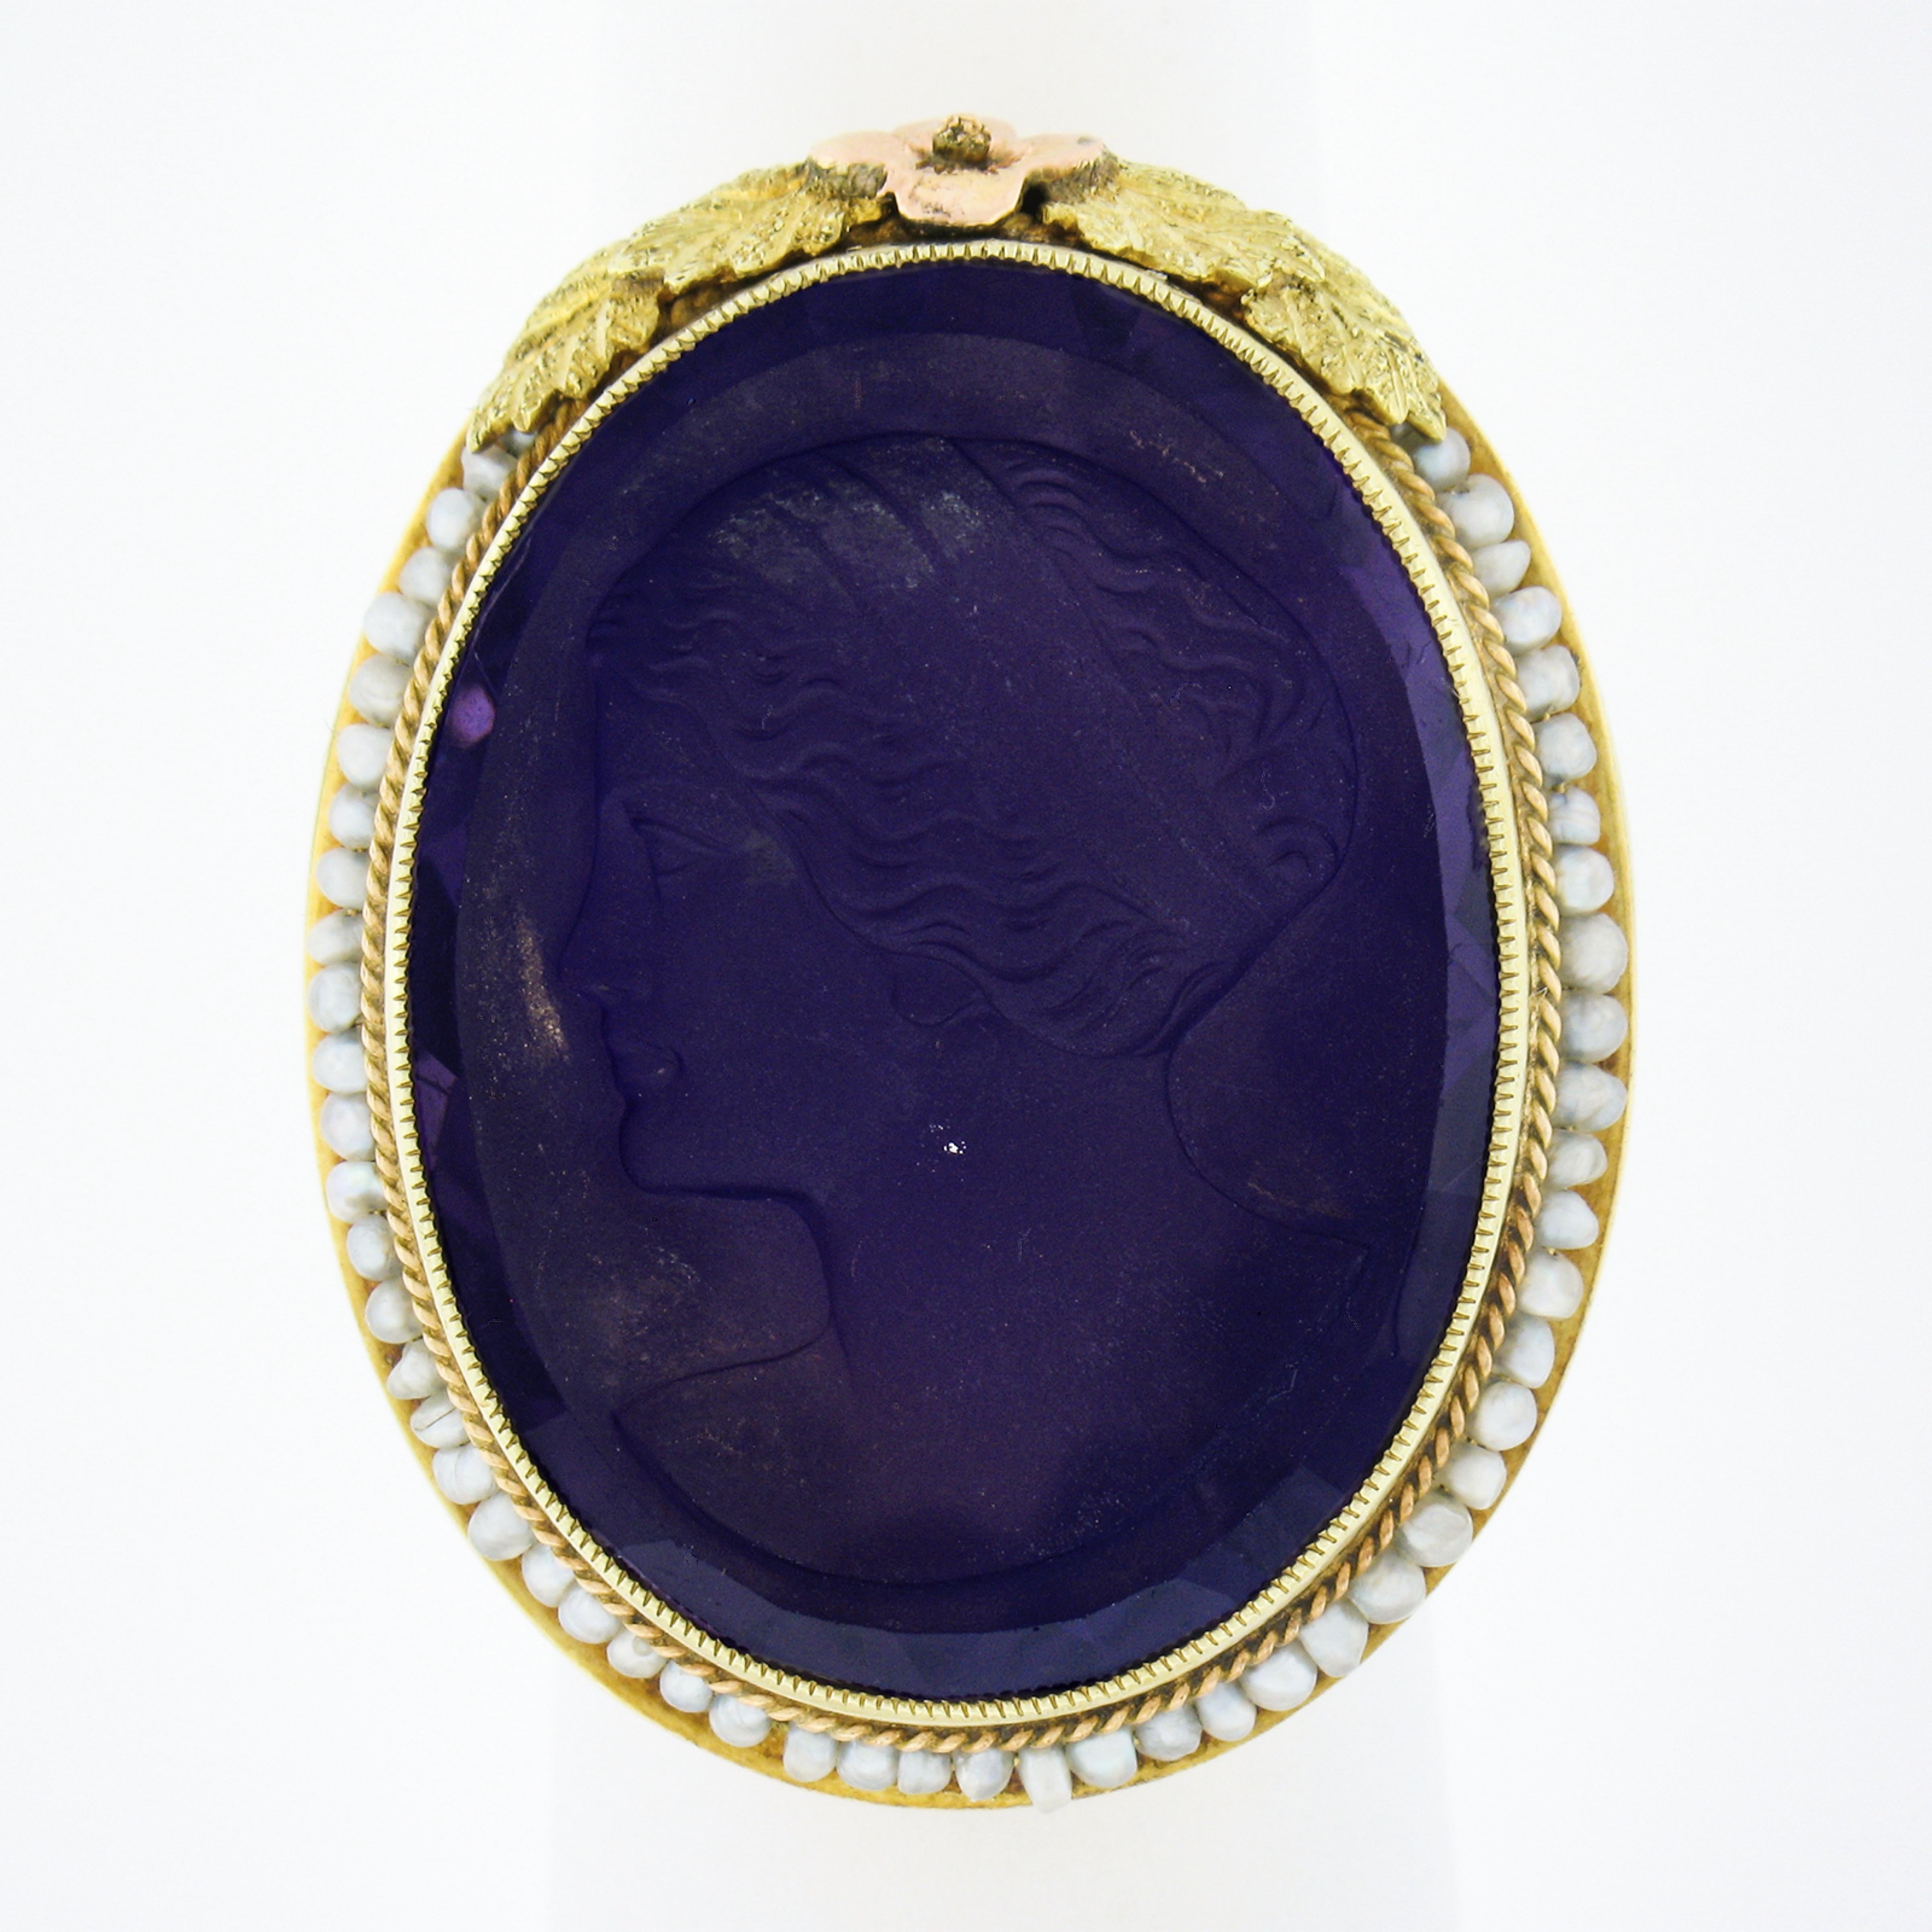 This rare antique art deco ring was crafted from solid 14k yellow & green gold with rose gold accents. It features a detailed carved amethyst left facing cameo neatly bezel set at the center of the ring. The outstanding carving shows a detailed